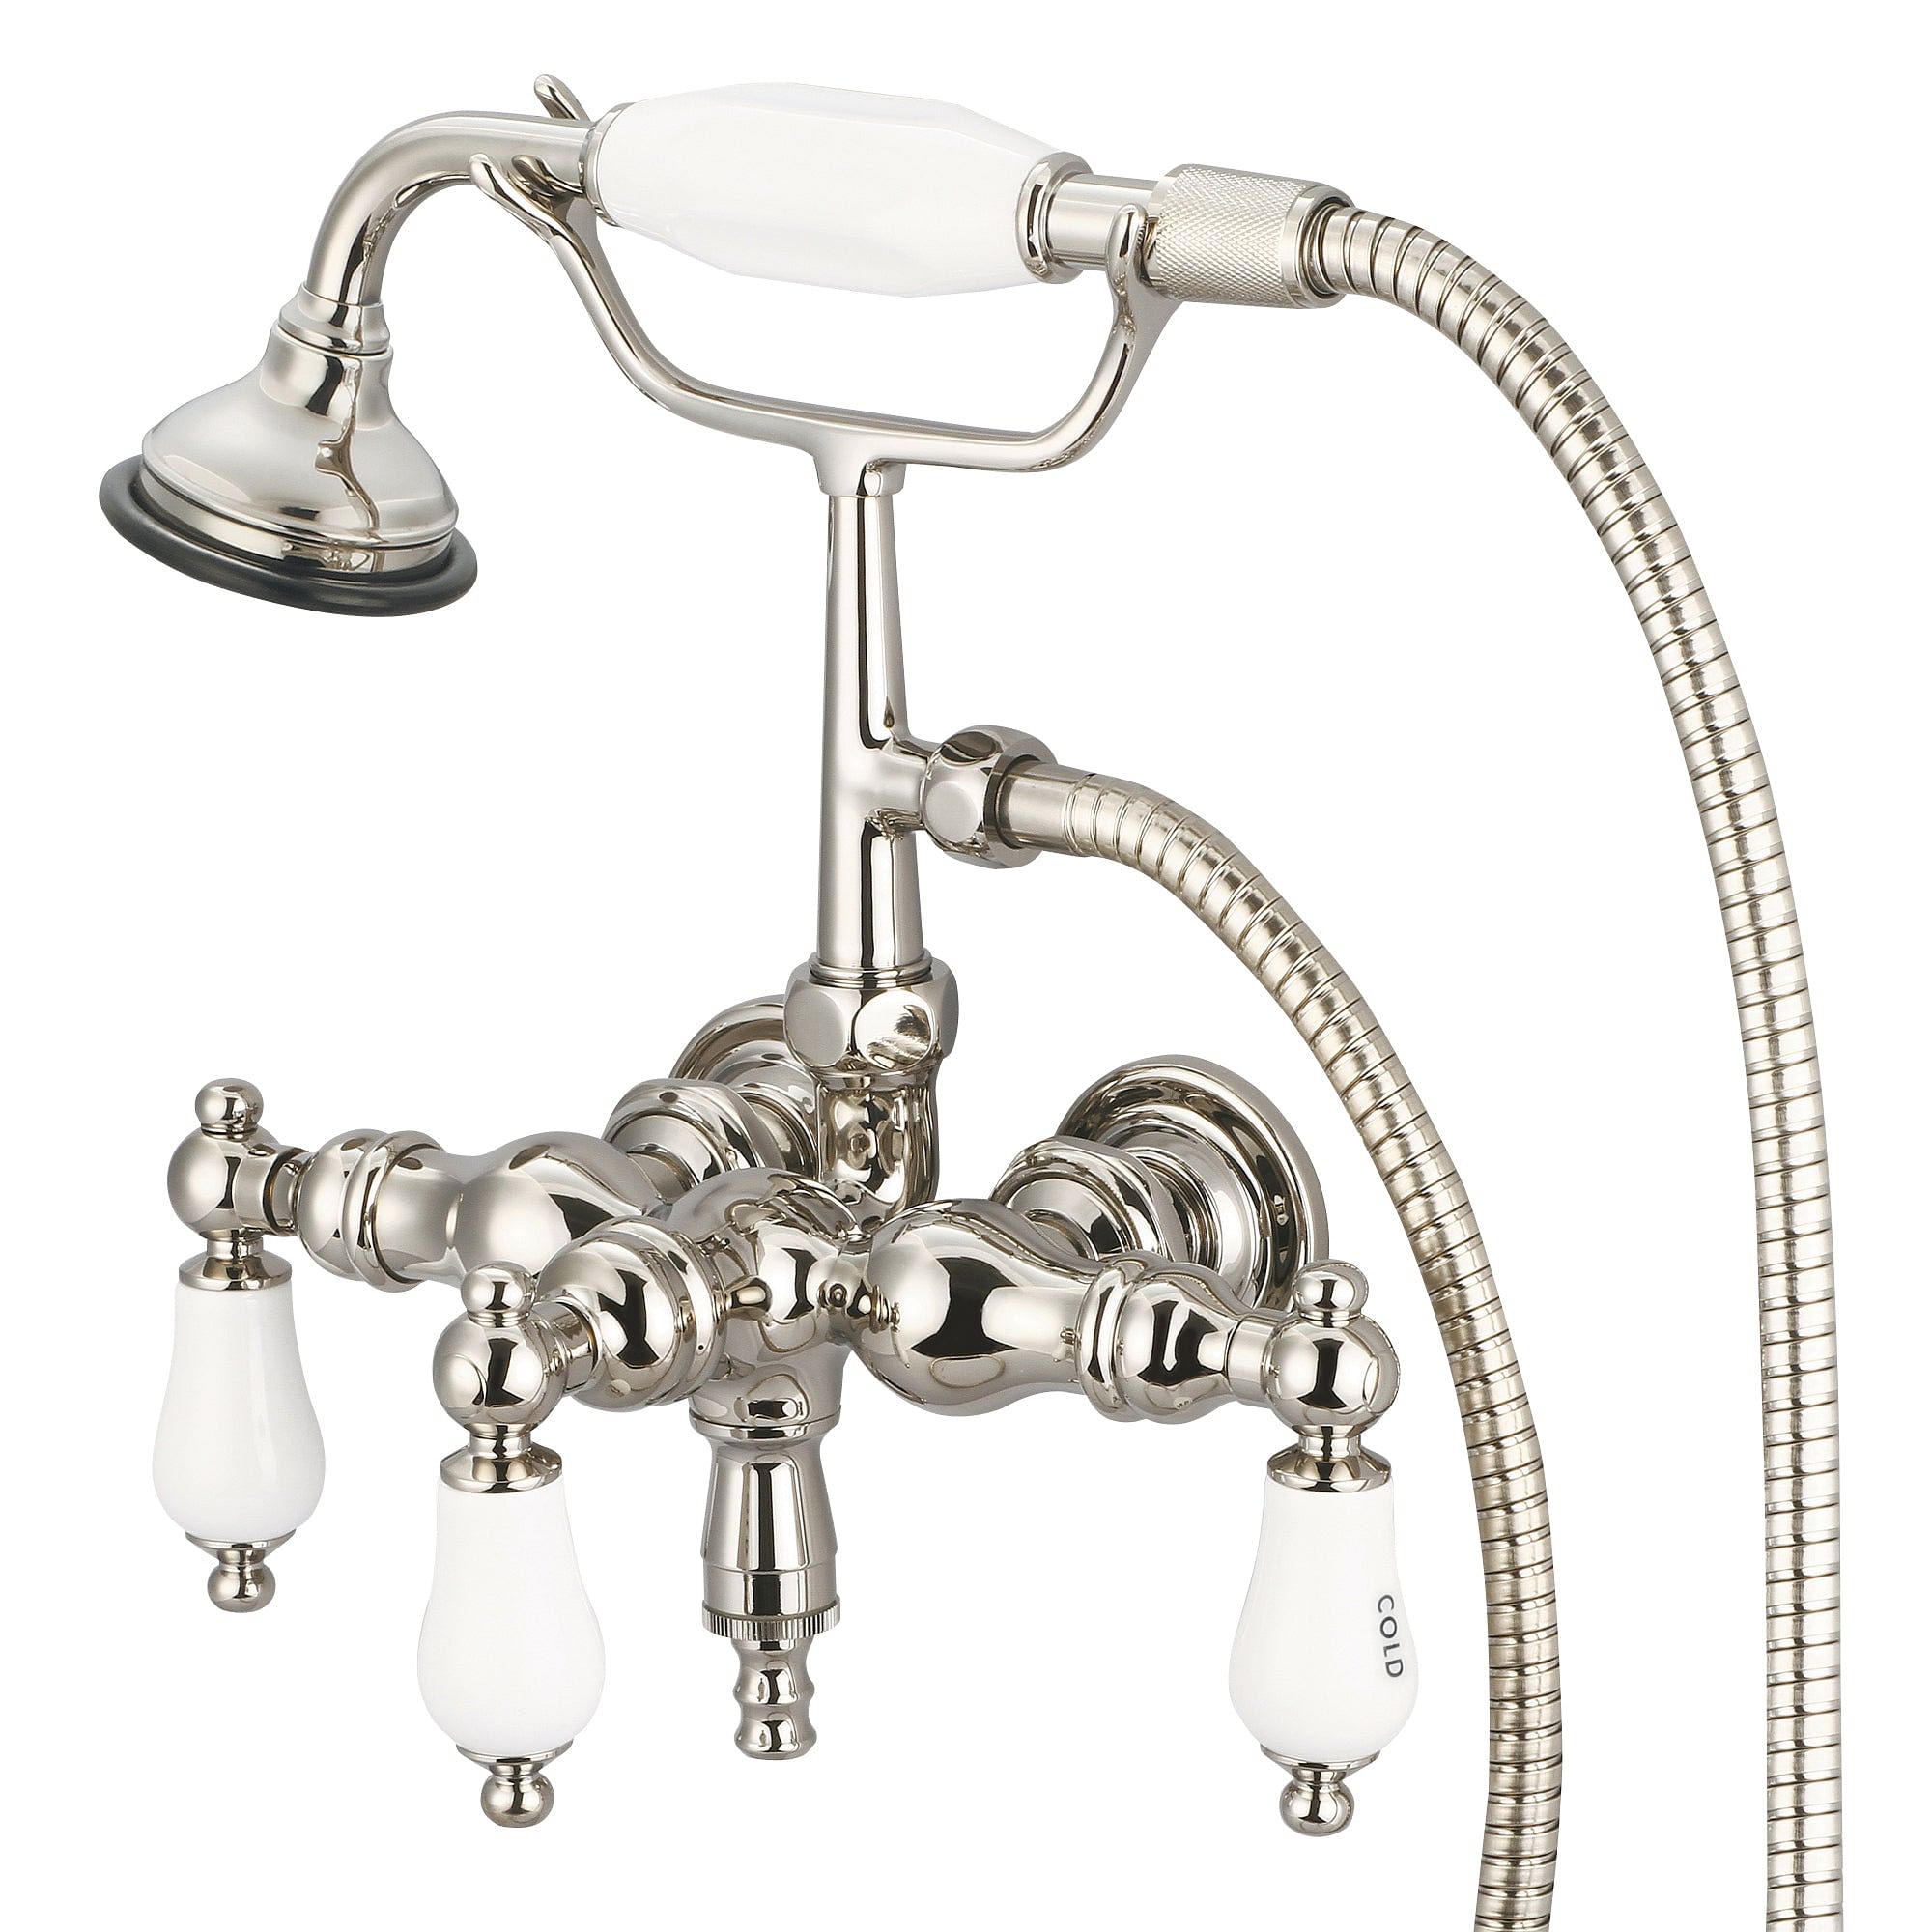 Vintage Classic 3.375 Inch Center Wall Mount Tub Faucet With Down Spout, Straight Wall Connector & Handheld Shower in Polished Nickel (PVD) Finish With Porcelain Lever Handles, Hot And Cold Labels Included